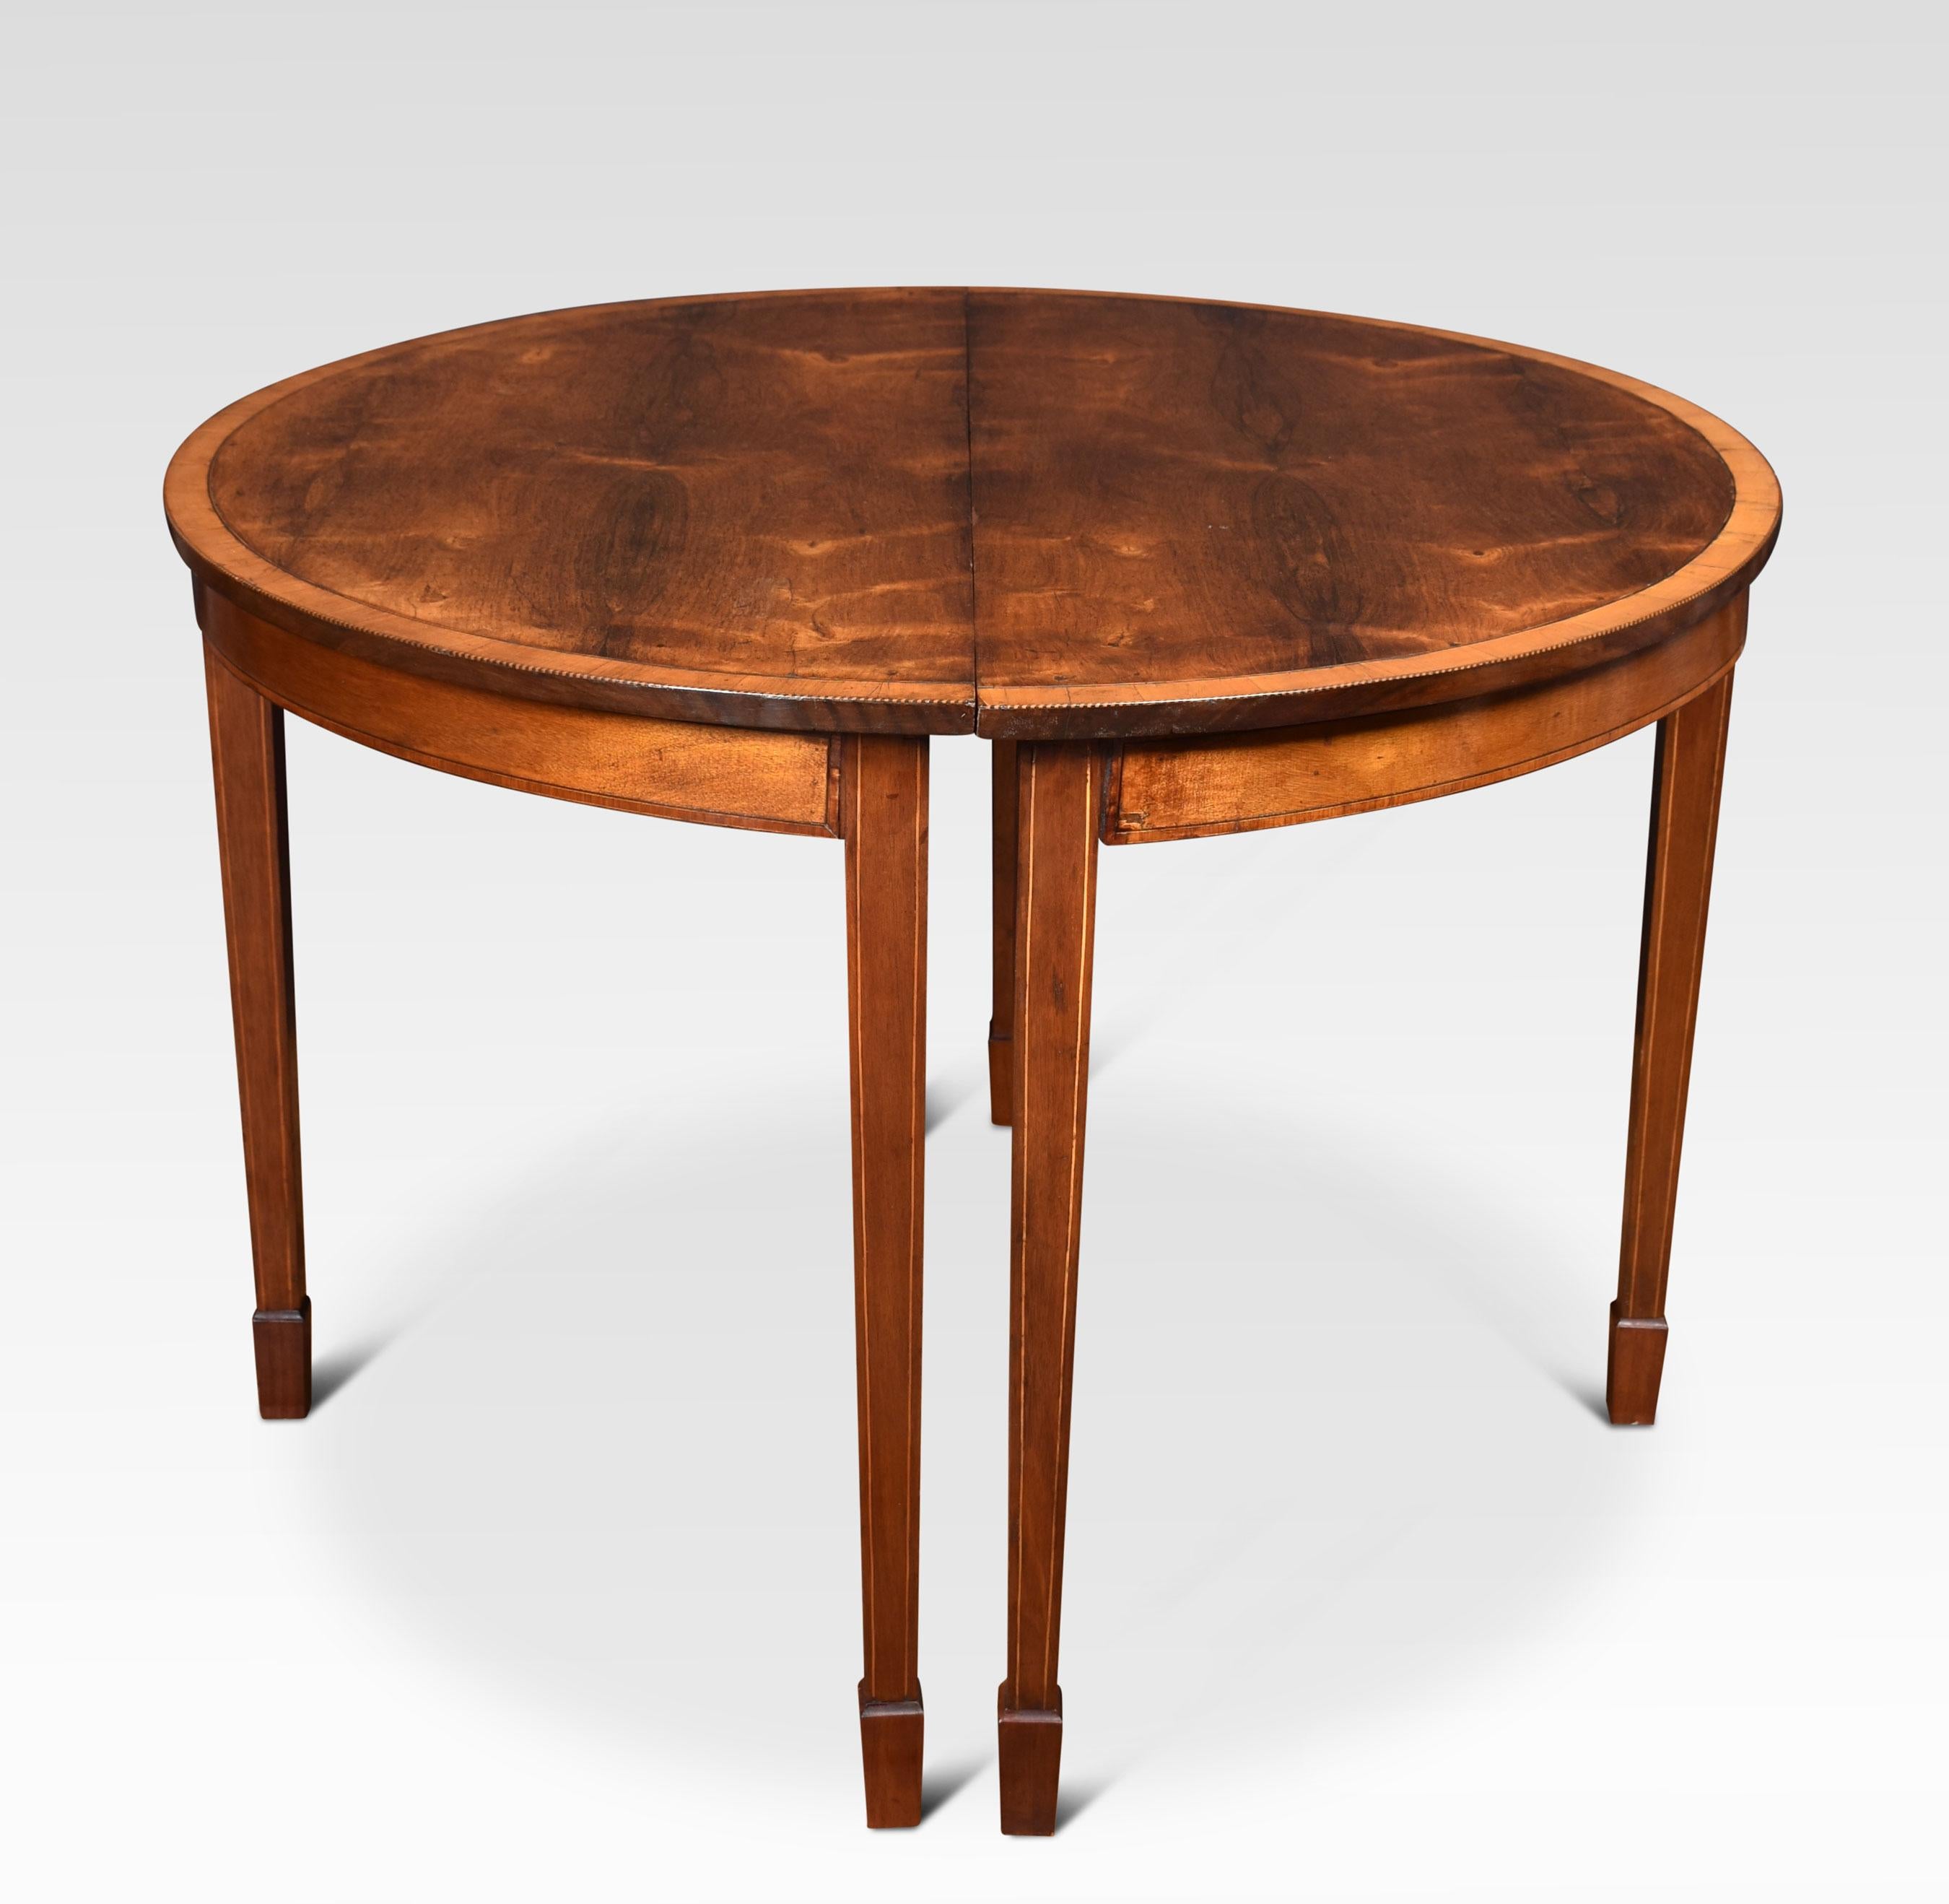 Pair of hall tables the well-figured half-round tops above satinwood banded molded edge. All raised up on tapering legs terminating in spade feet.
Dimensions
Height 32.5 inches
Width 48.5 inches
Depth 25 inches.